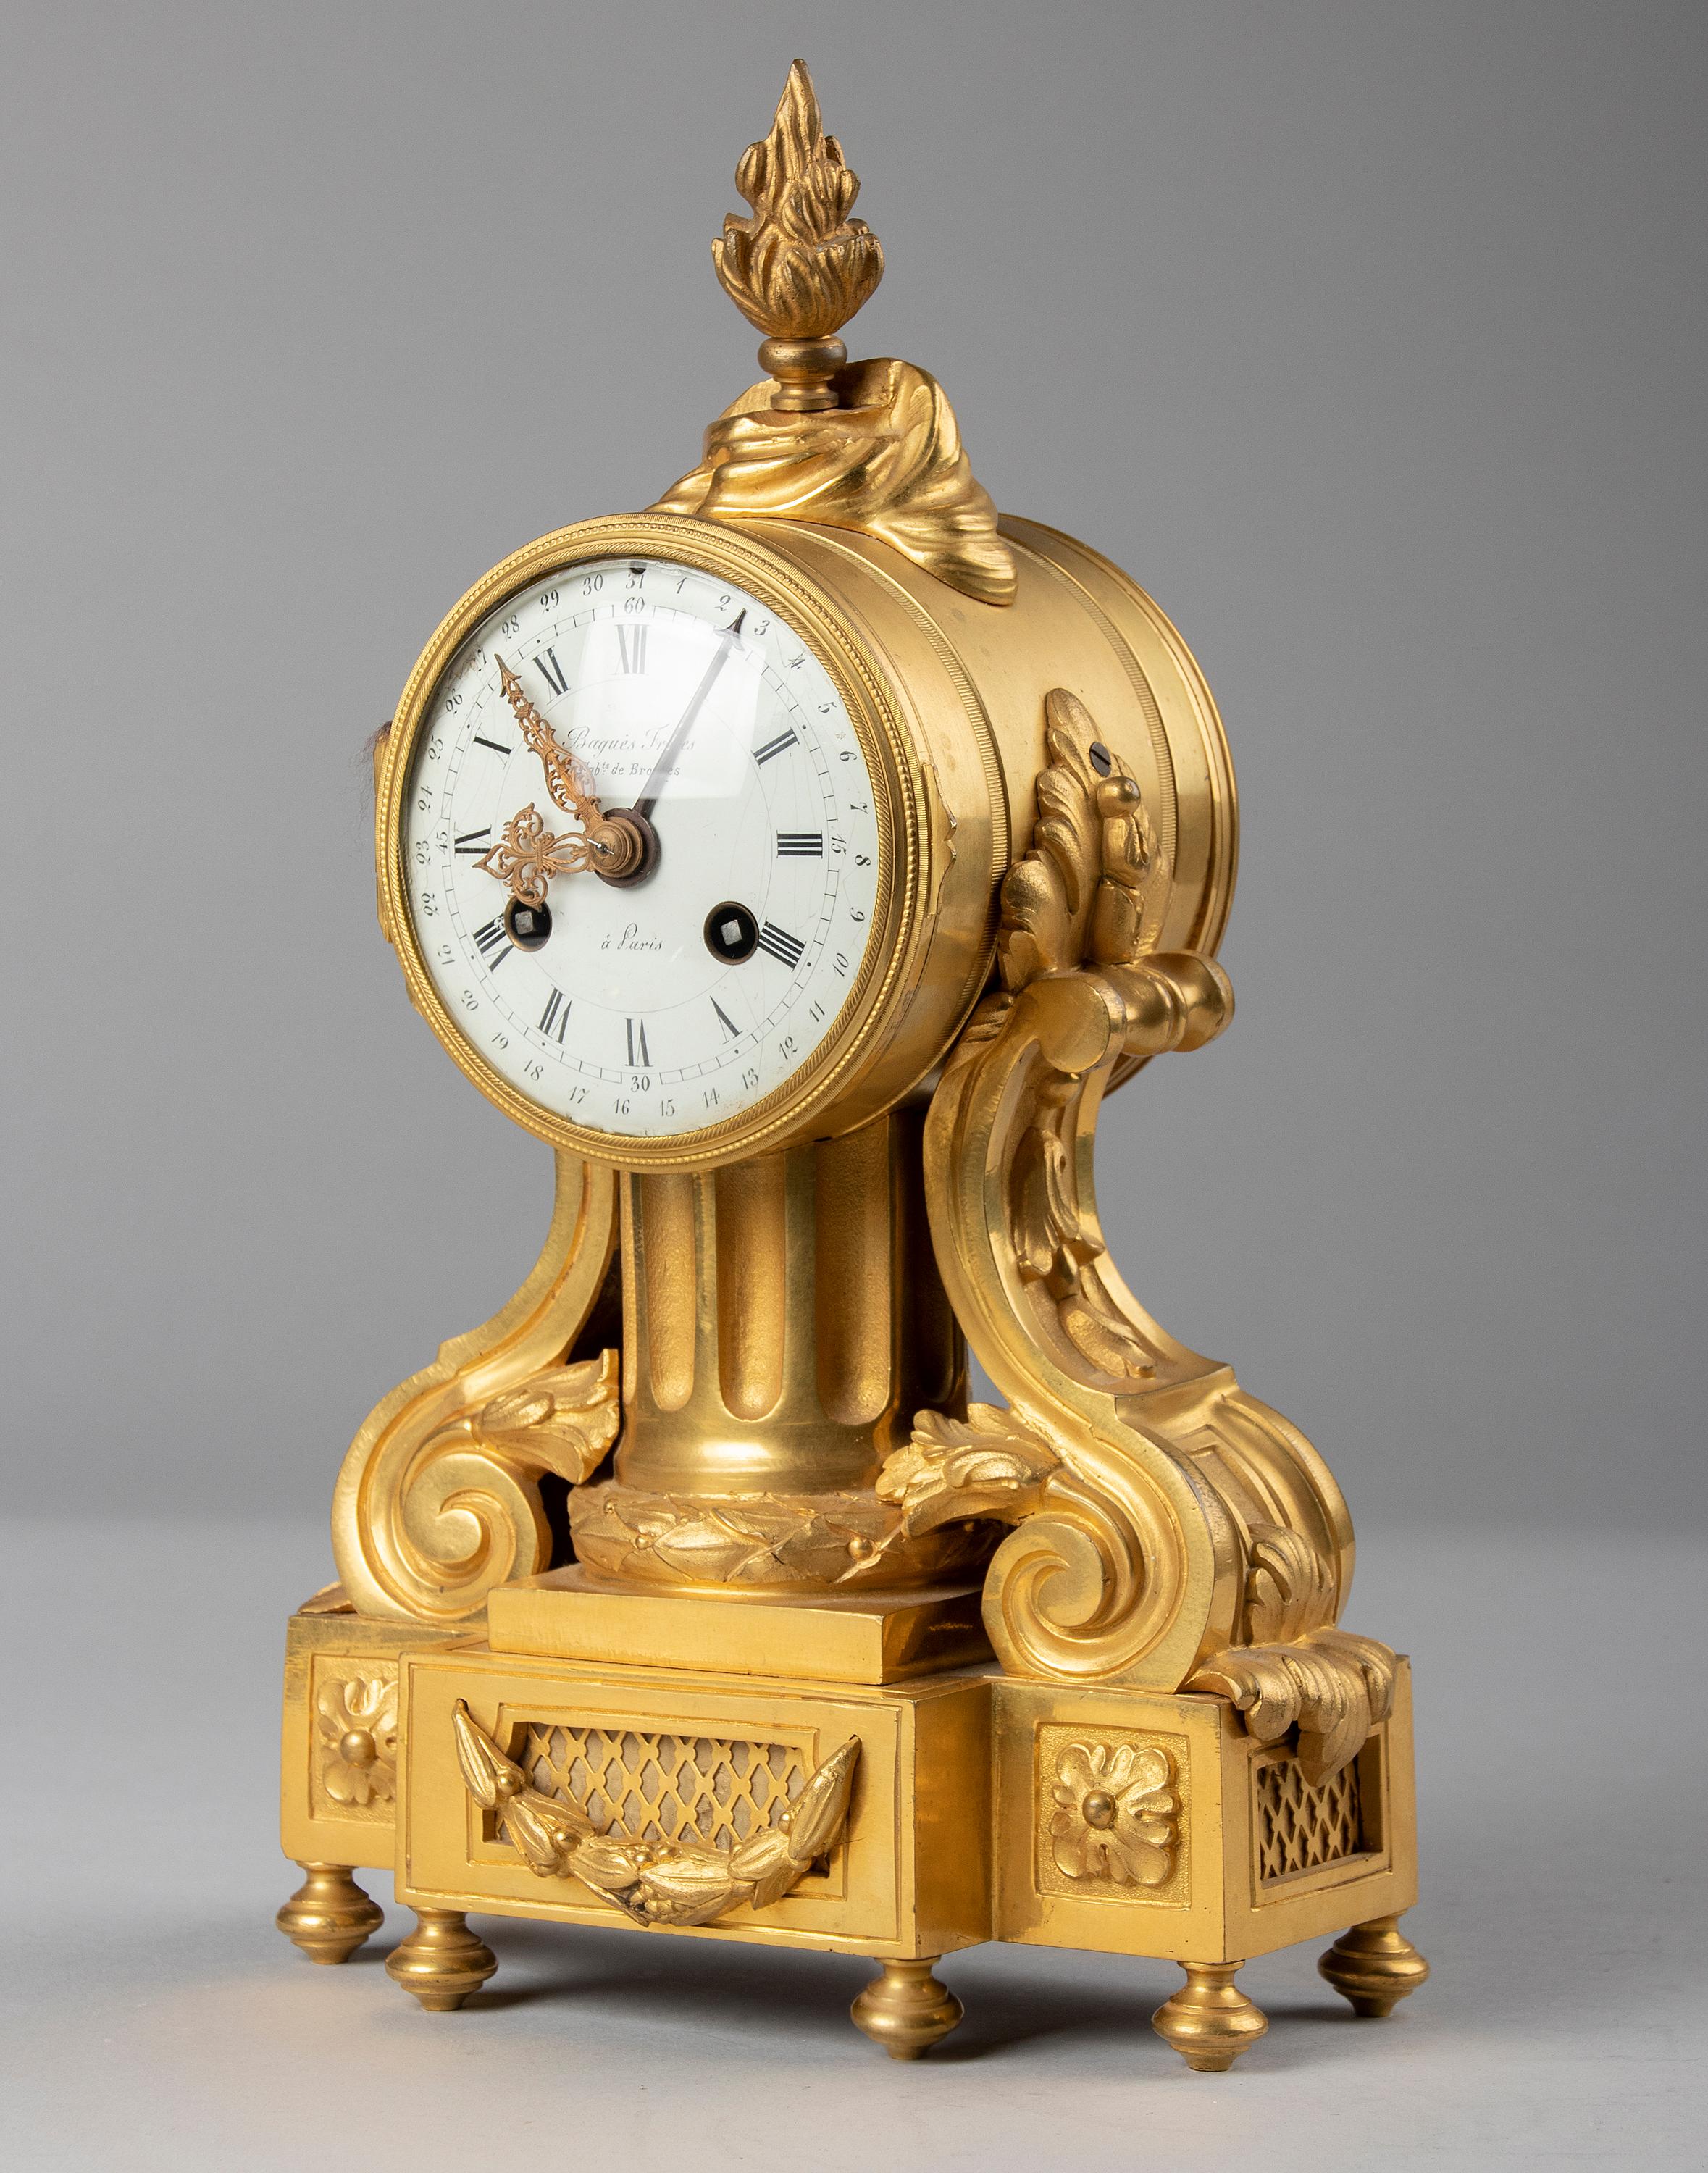 A fine quality Louis XVI style bronze ormolu mantel clock. The case is made of gilt brass and bronze ormolu casted ornaments, the dial is enameled iron. Ornated with neo-classical ornaments, laurel wreath, fluted column, torch and scrolled sides.